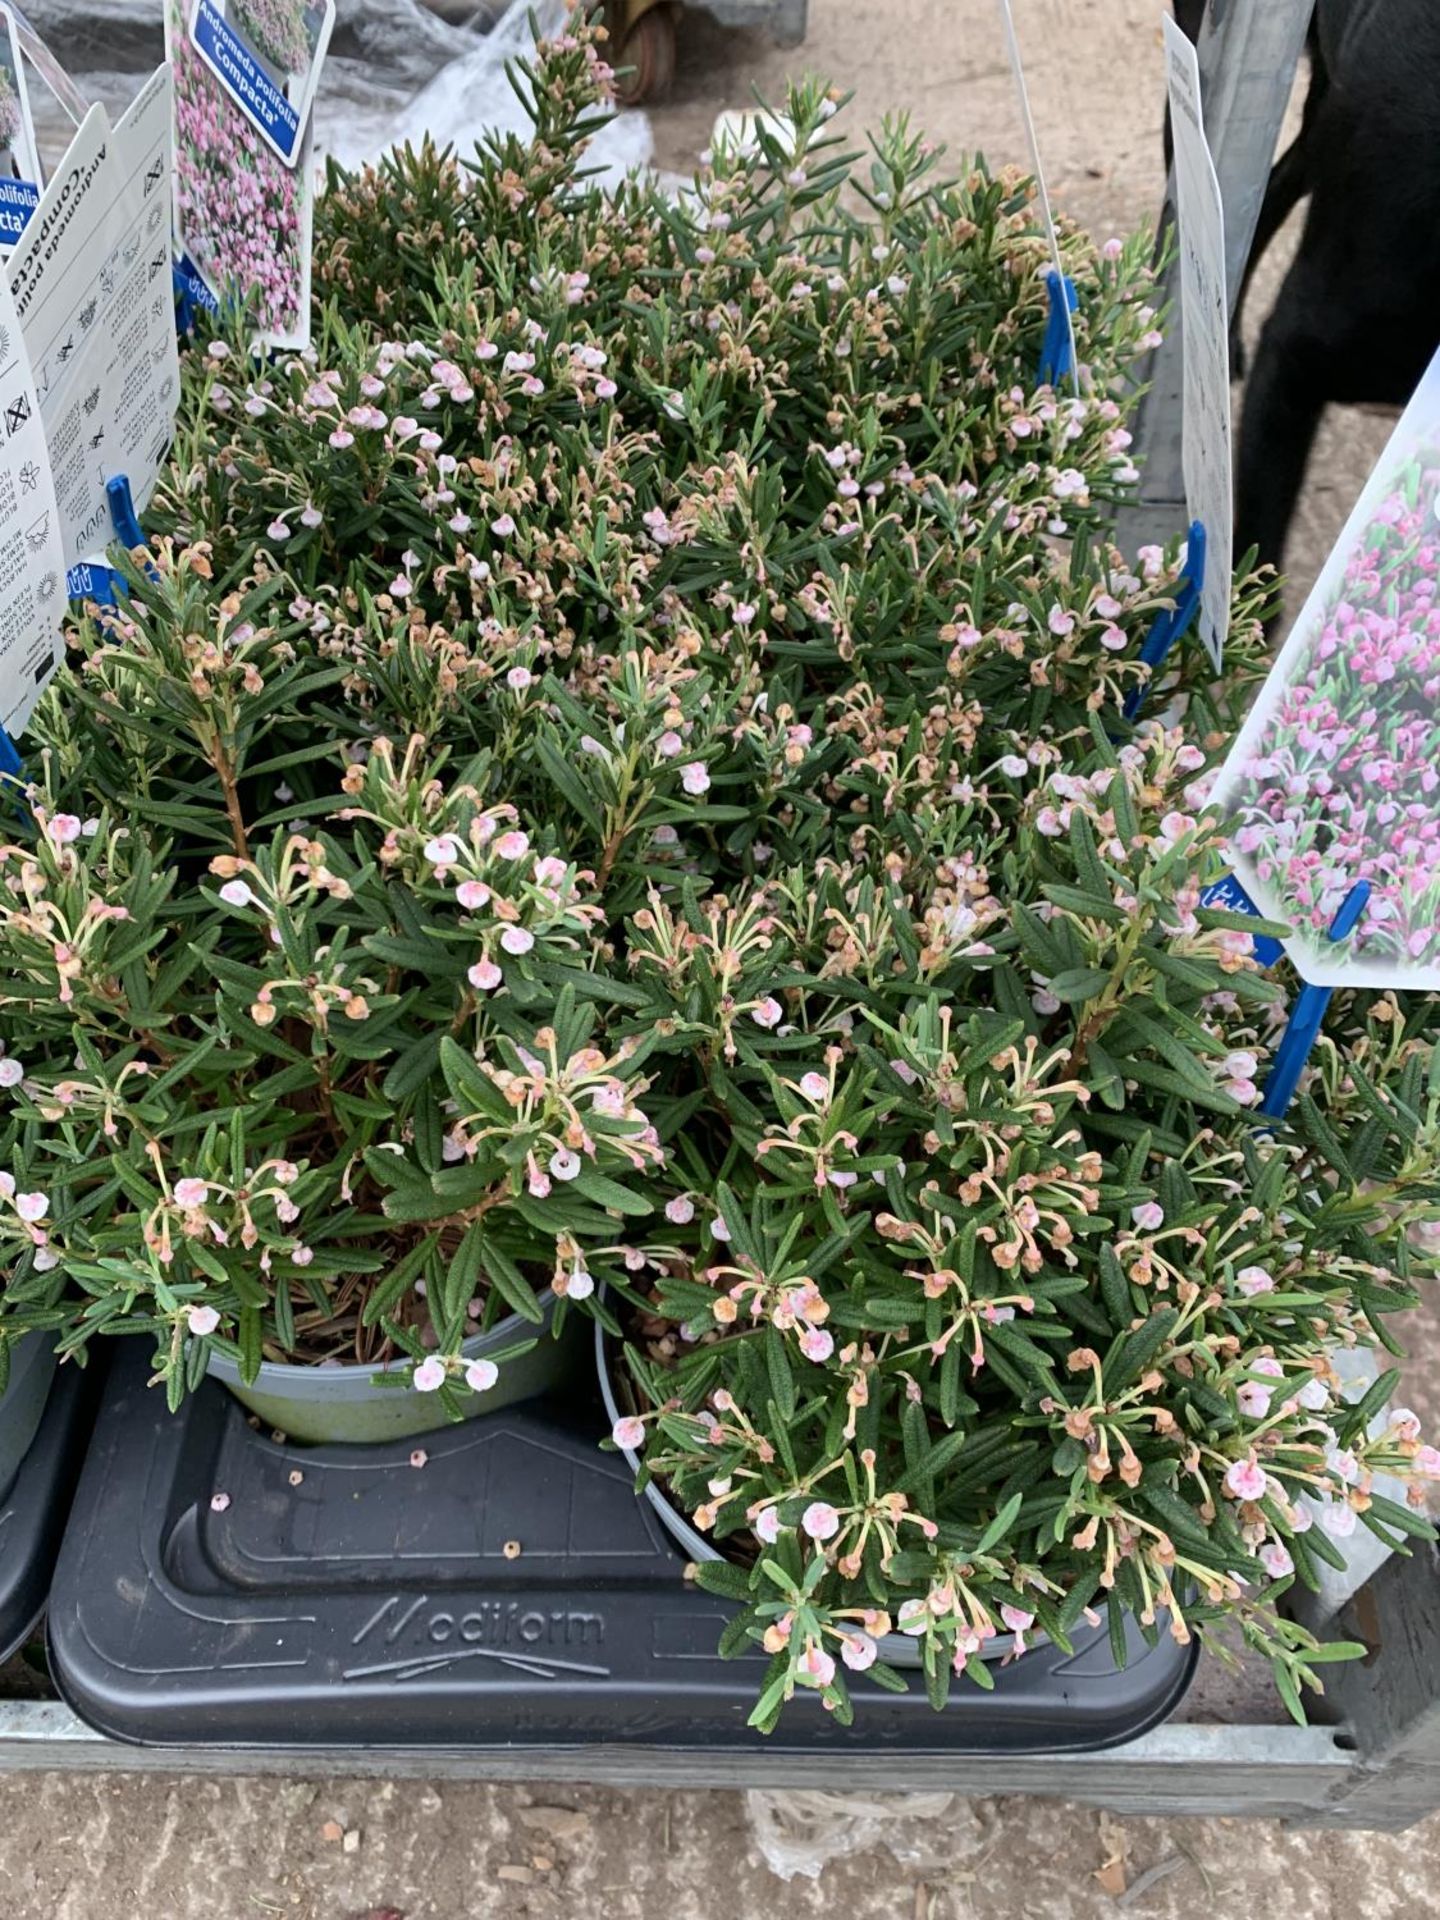 SIX POTS OF ANDROMEDA POLIFOLIA COMPACTA TO BE SOLD FOR THE SIX PLUS VAT